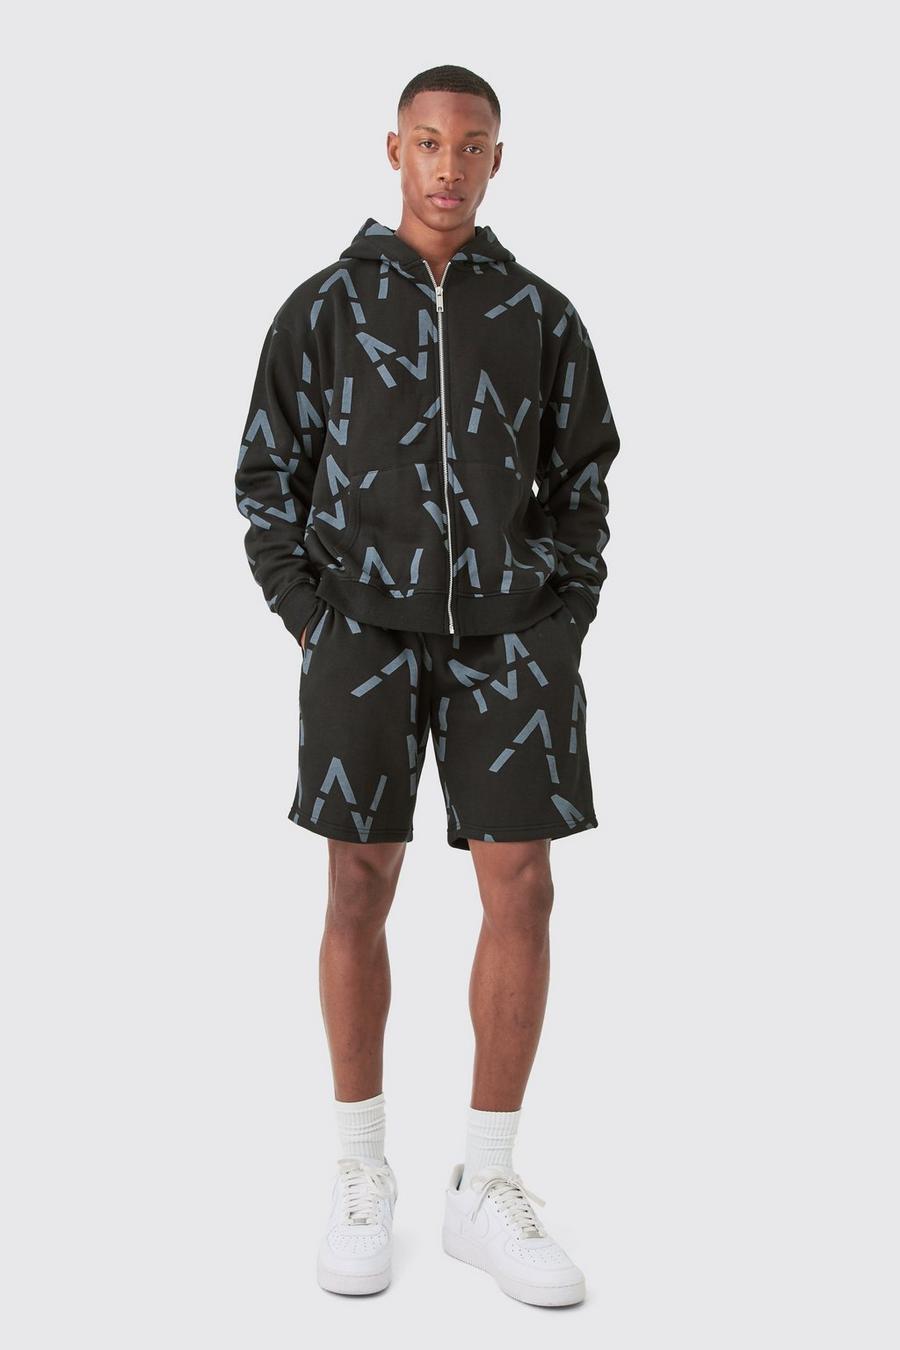  Oversized Boxy Man All Over Print Zip Hoodie Short Tracksuit, Black